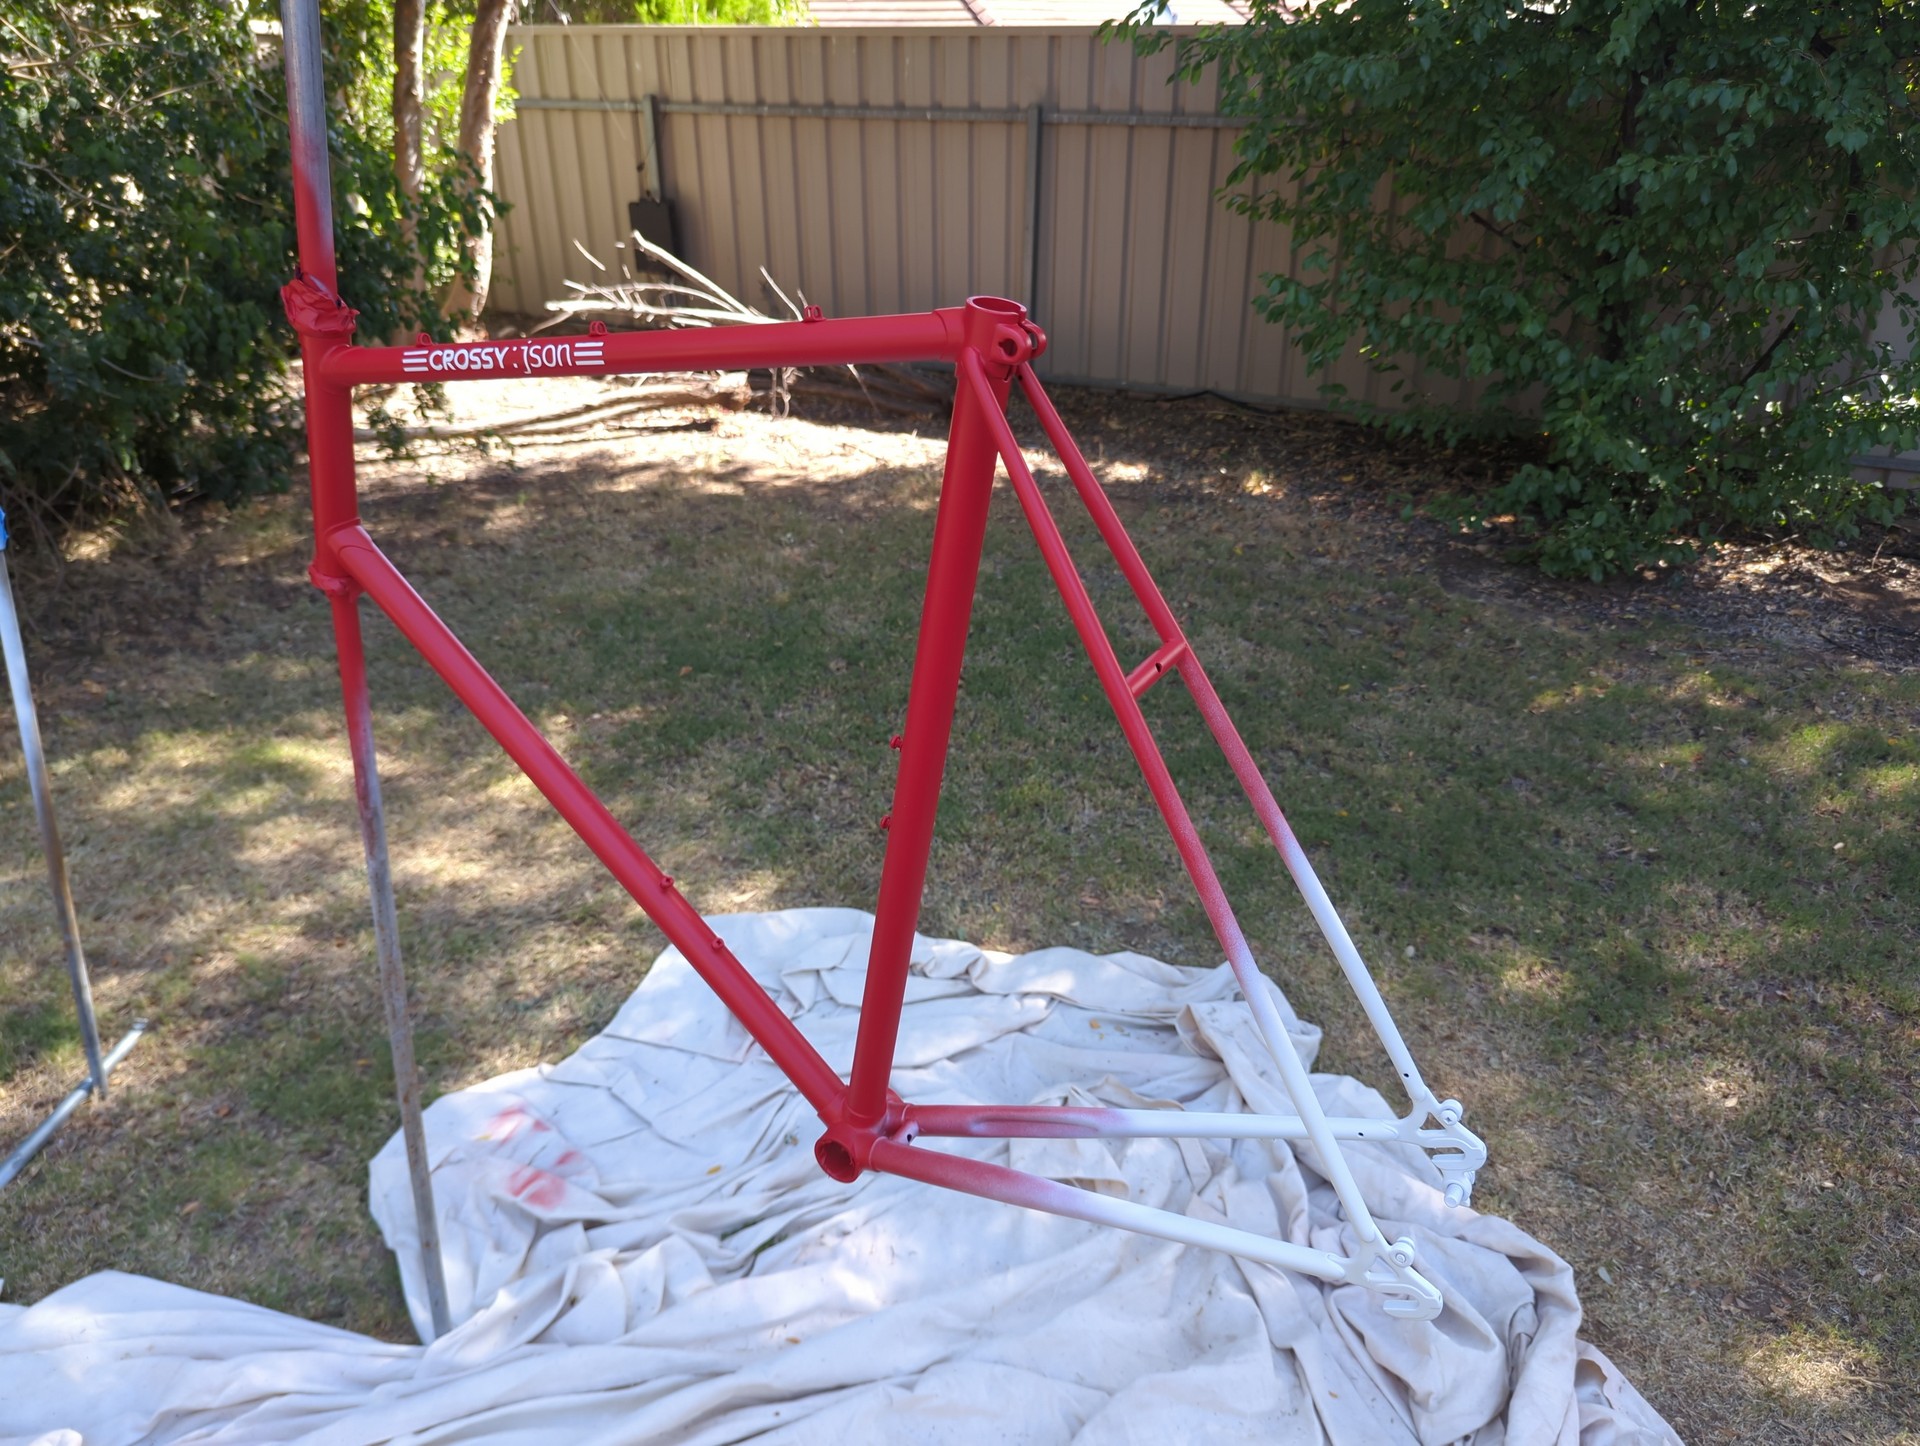 Near finished frame with red, decals and gradient showing